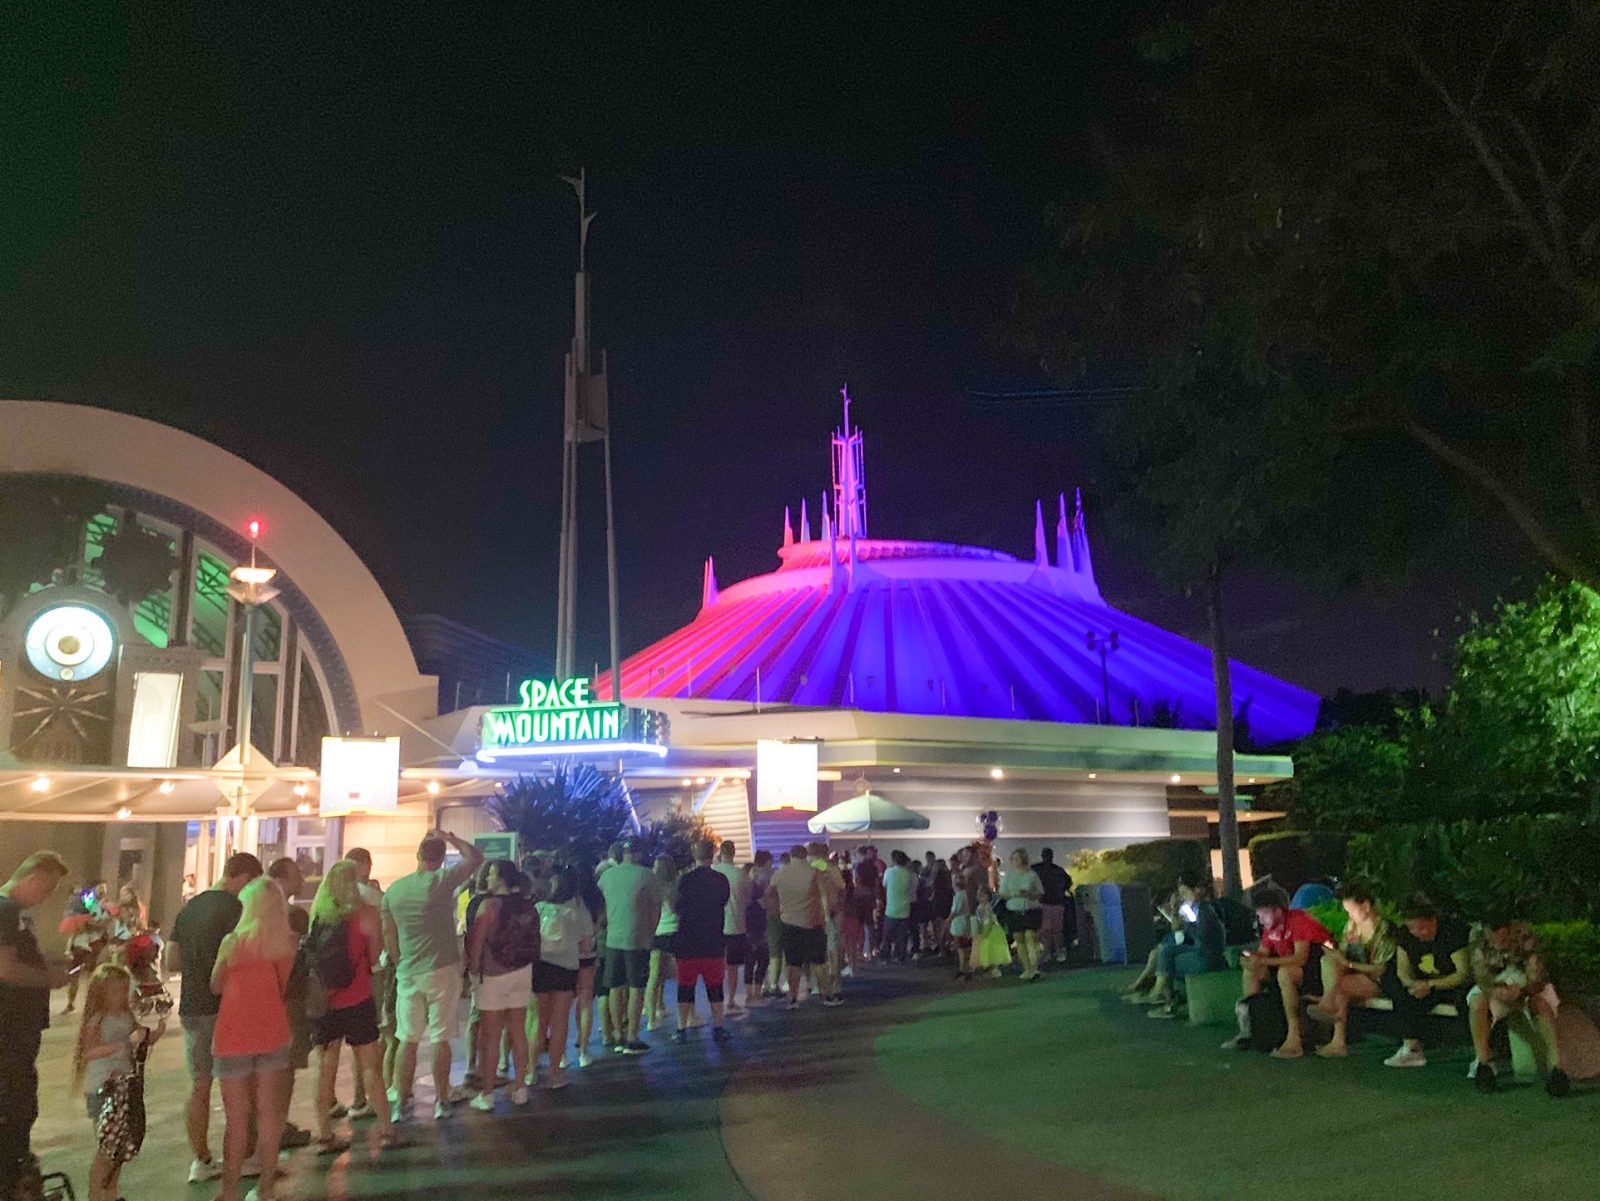 outside the entrance of Space Mountain at night